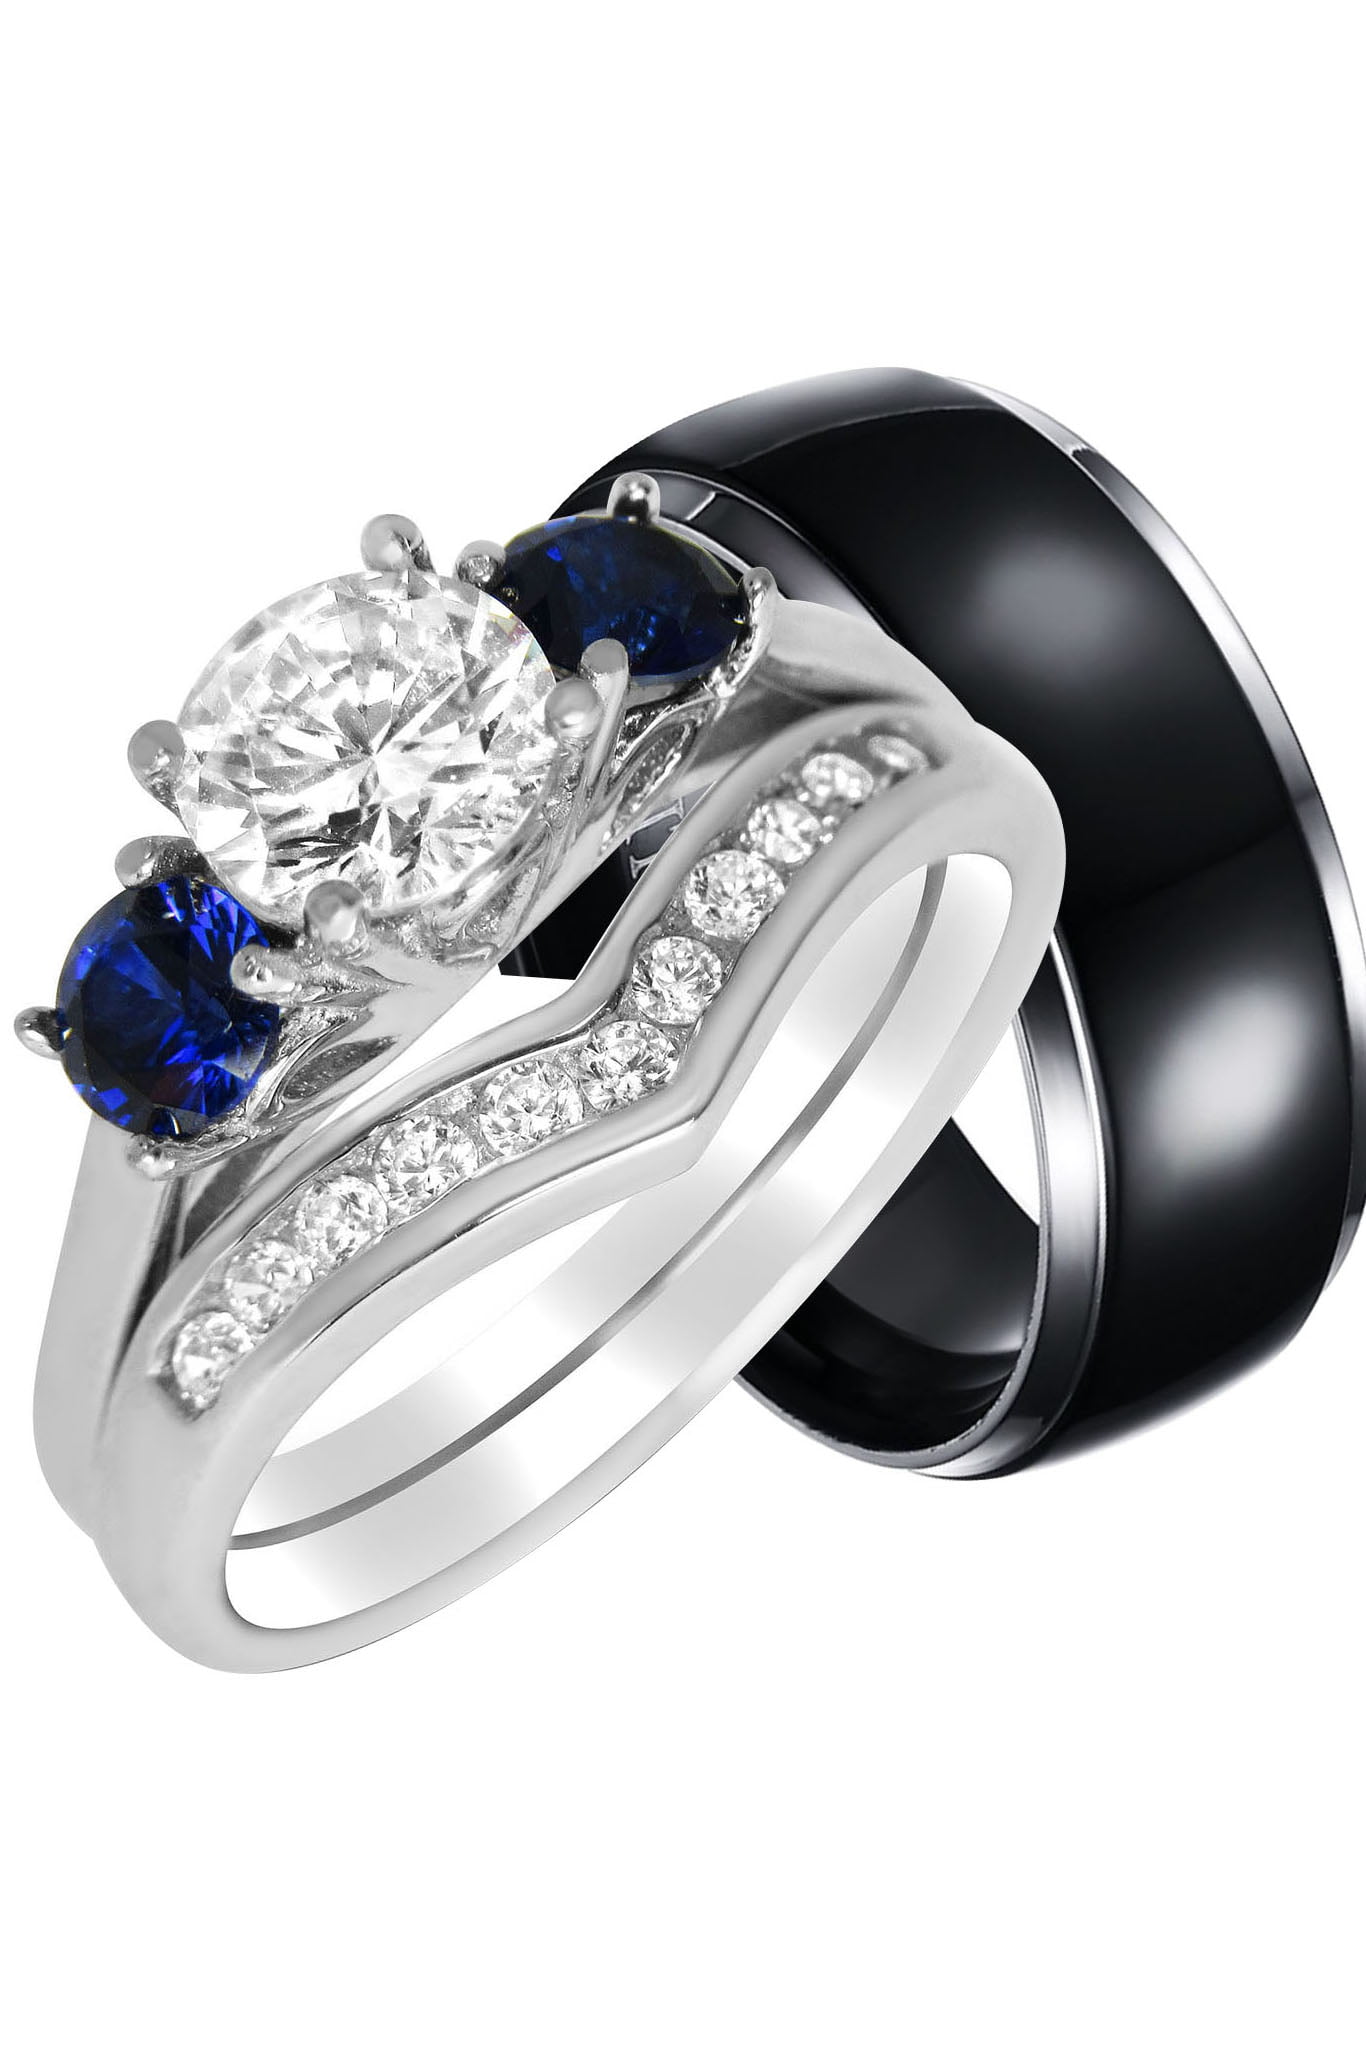 LaRaso Co Wedding  Ring  Set for Him and Her Cheap  His 